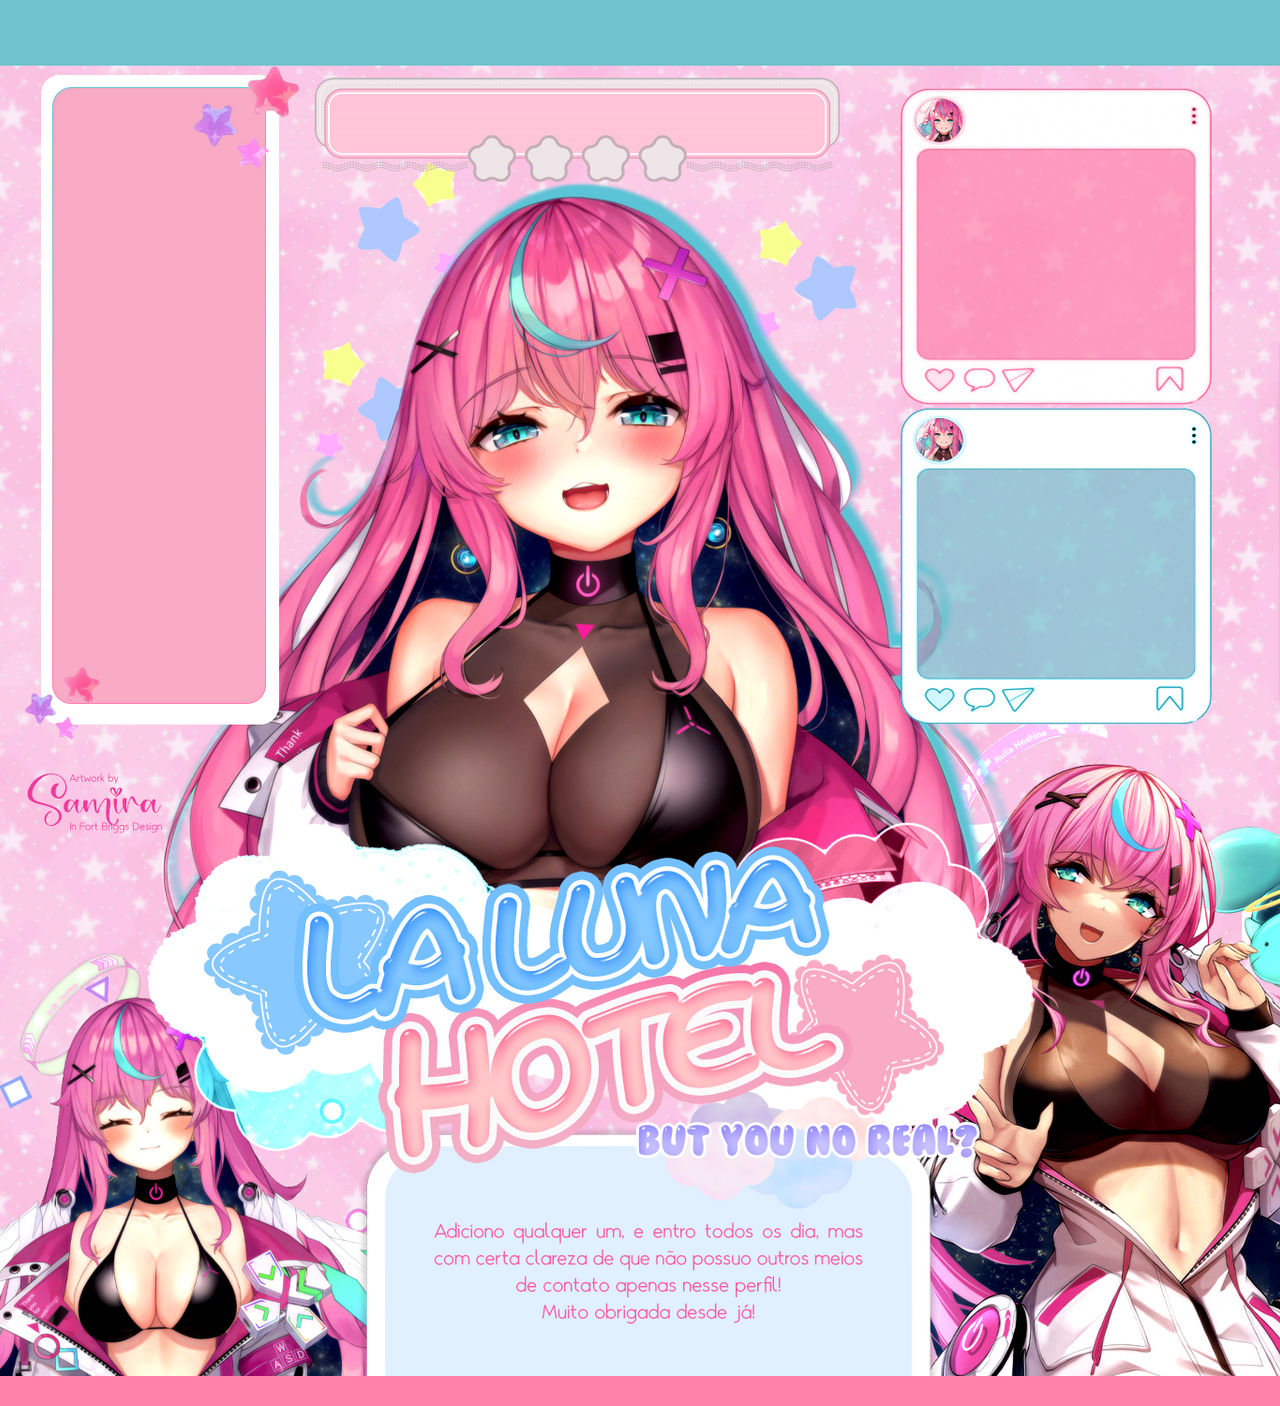 Layout for L3xis] - MODELO 02 by ImaginariumAdm on DeviantArt